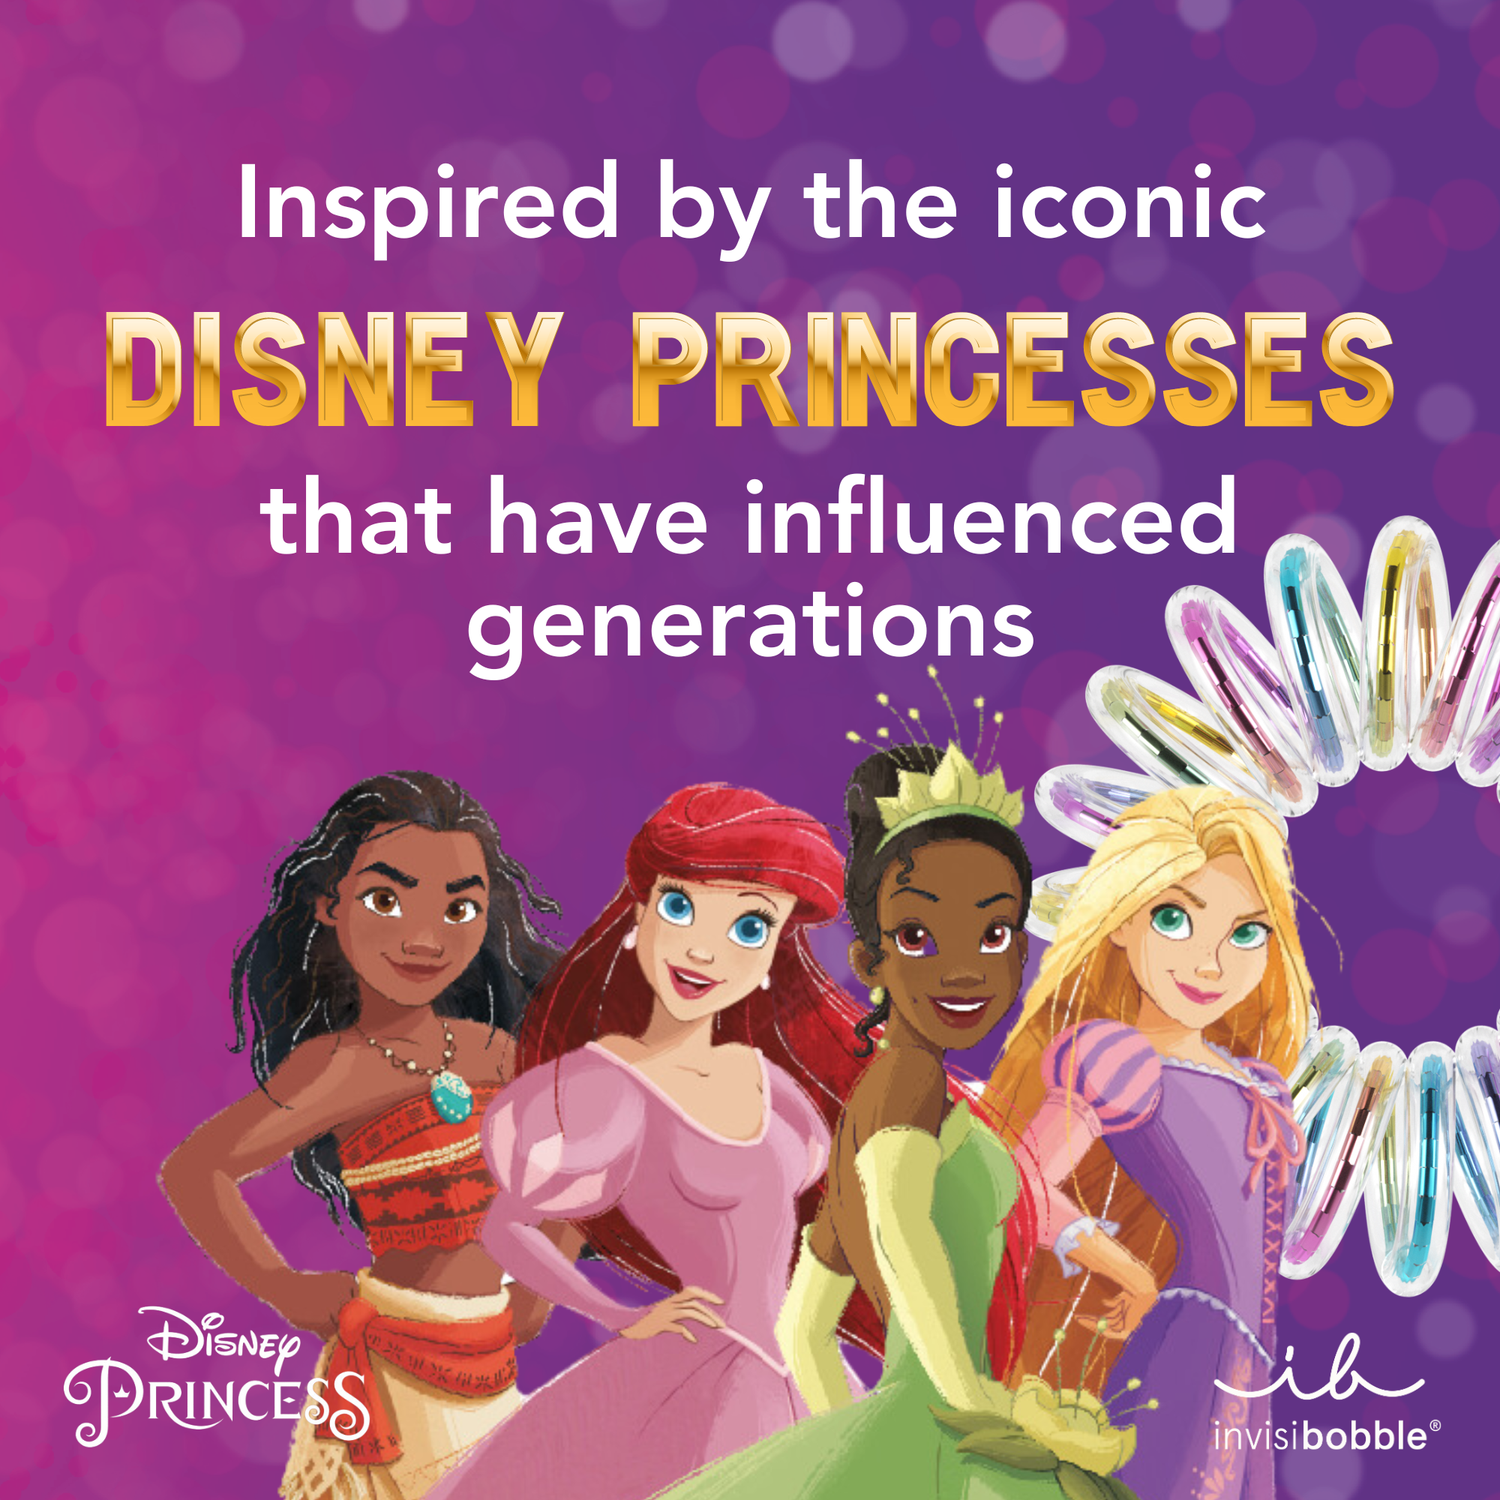  Invisibobble Kids Disney Moana Sprunchie Duo: Gentle, stylish hair accessory for Disney fans of all ages.